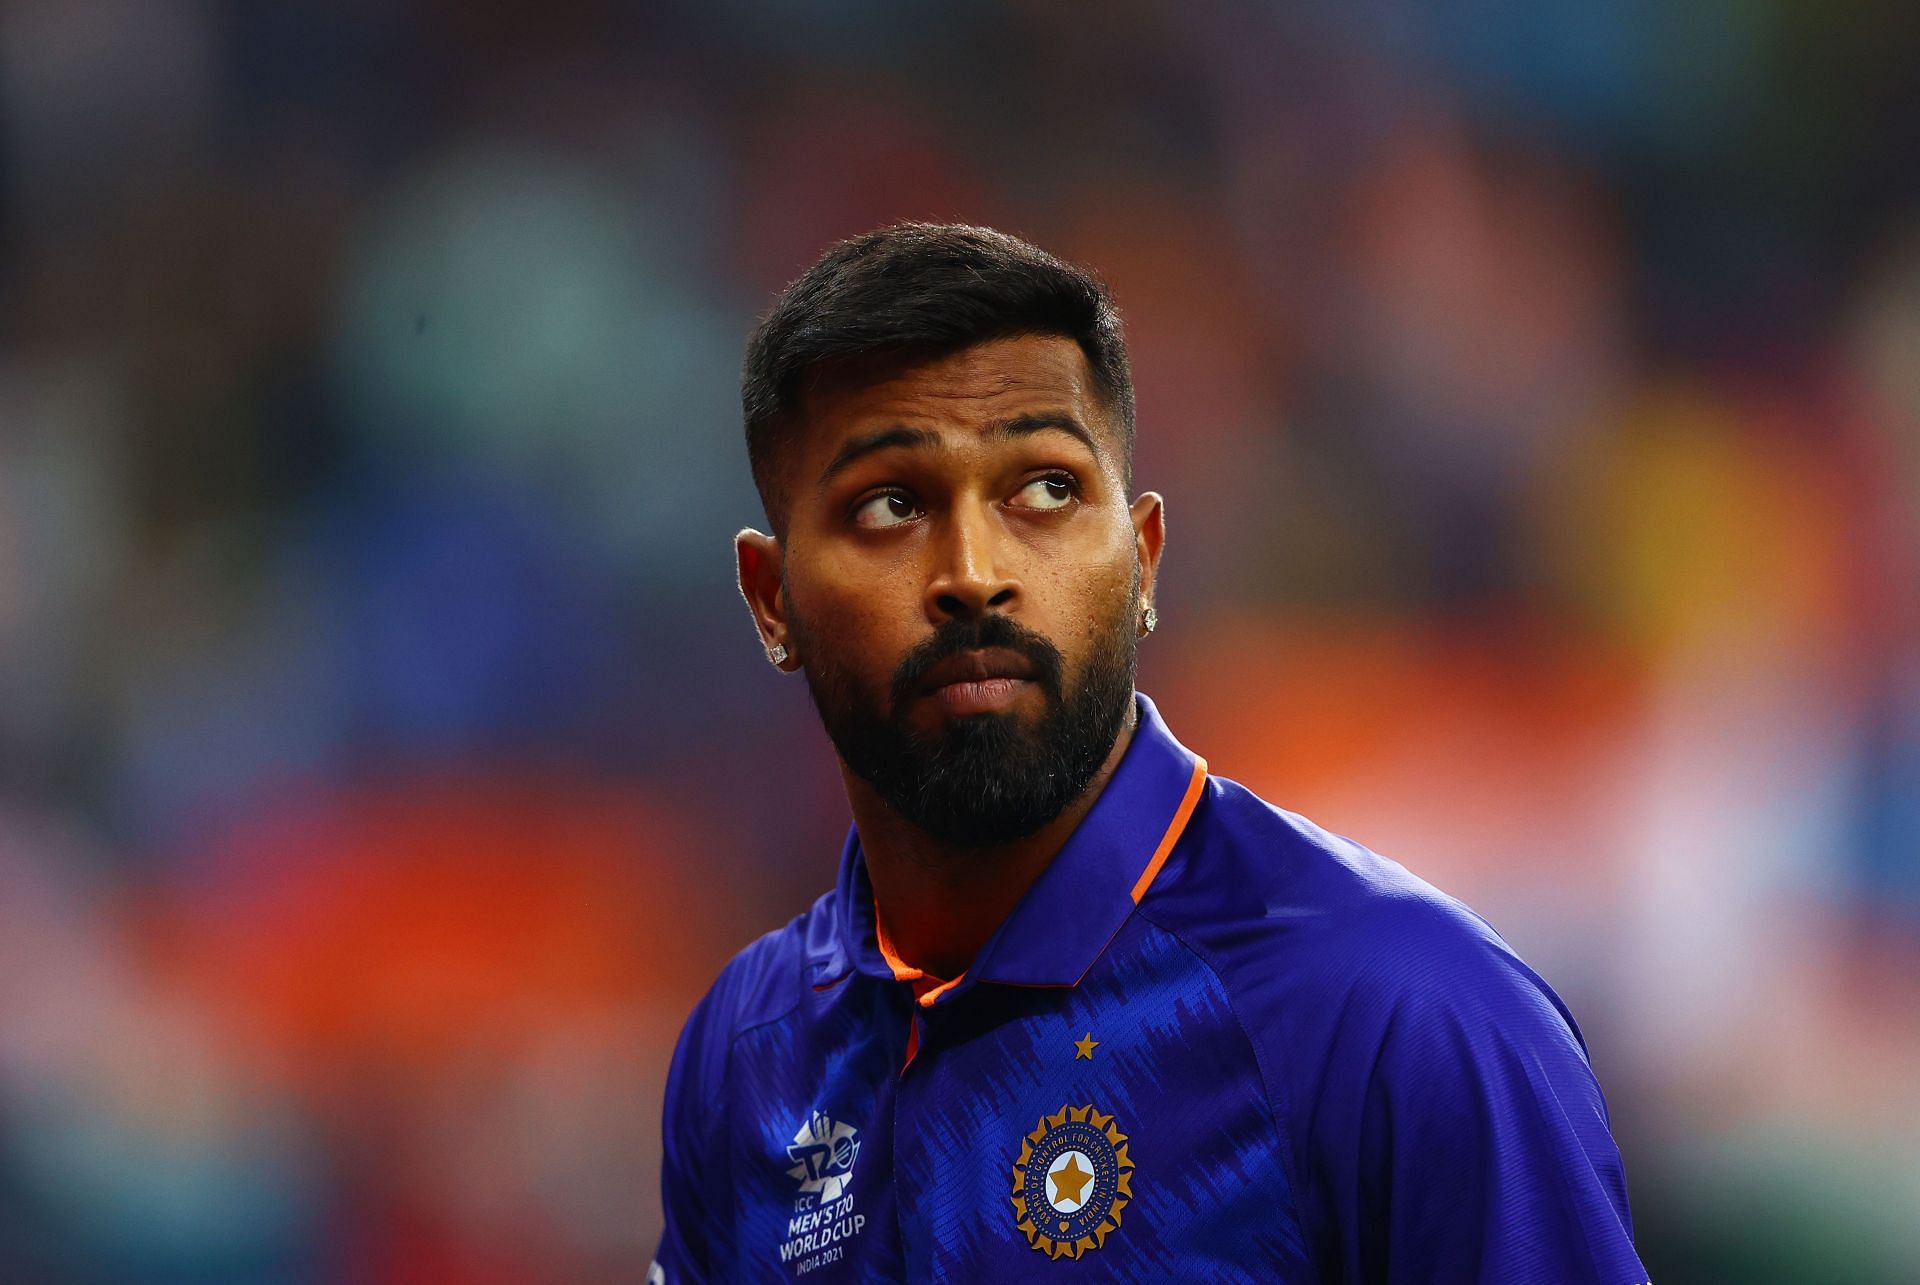 Hardik Pandya produced an all-round performance in the first T20I vs England.